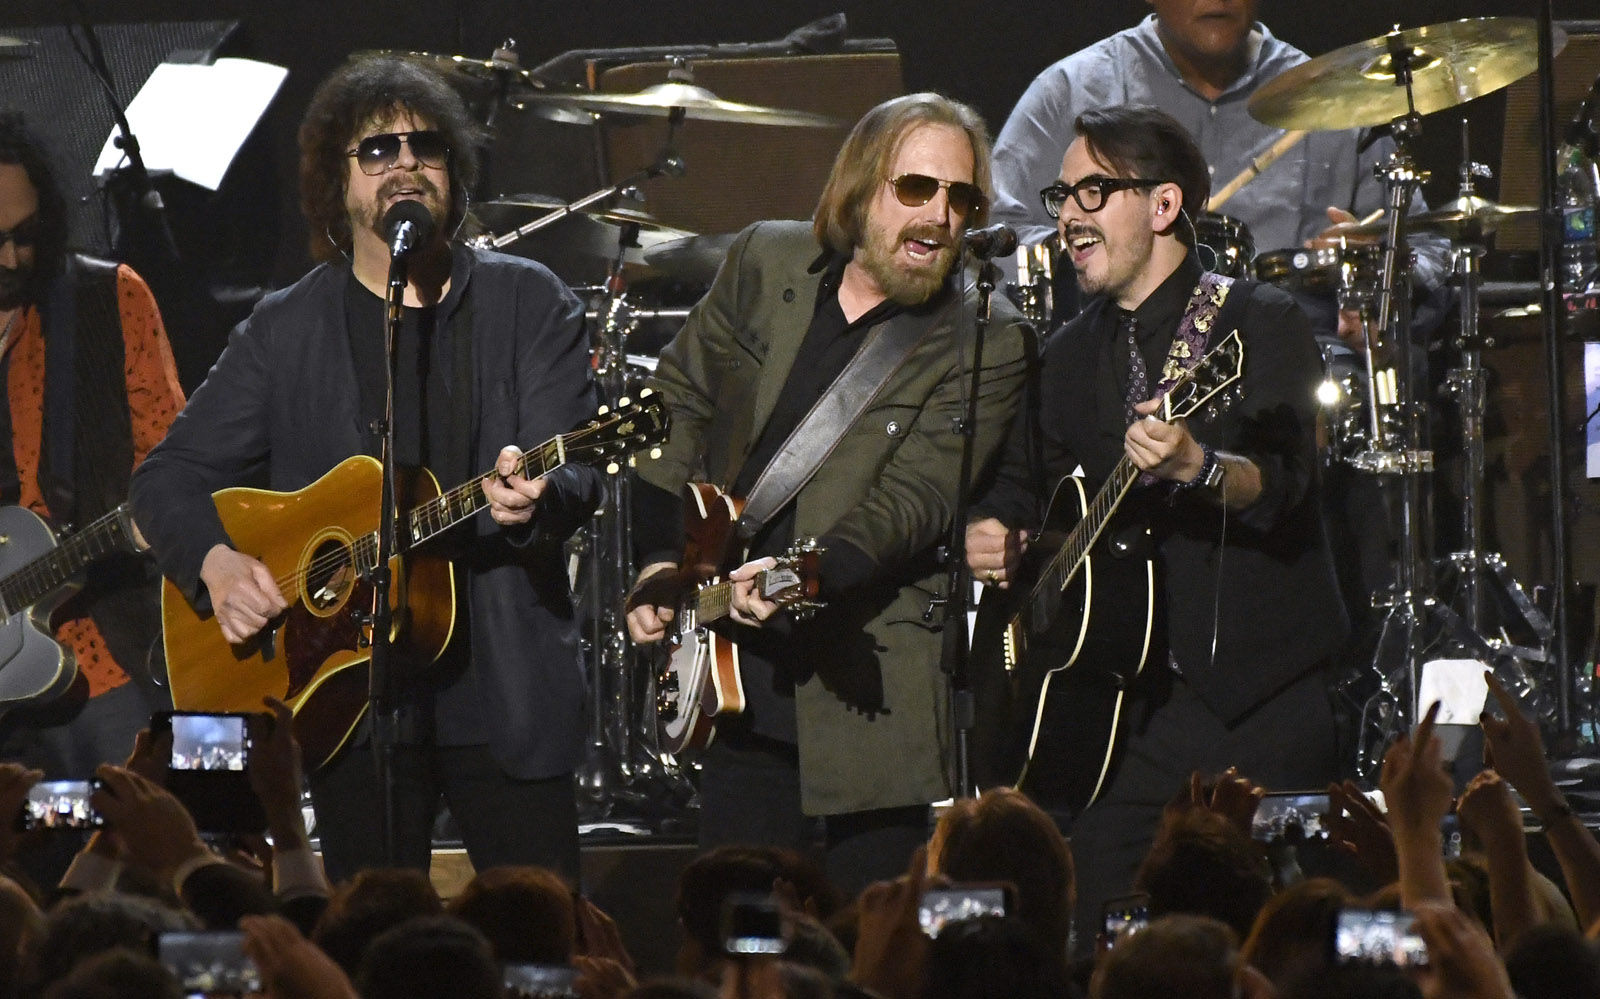 Jeff Lynne, from left, Tom Petty and Dhani Harrison perform "I Won't Back Down" at the MusiCares Person of the Year tribute honoring Tom Petty at the Los Angeles Convention Center on Friday, Feb. 10, 2017. (Photo by Chris Pizzello/Invision/AP)